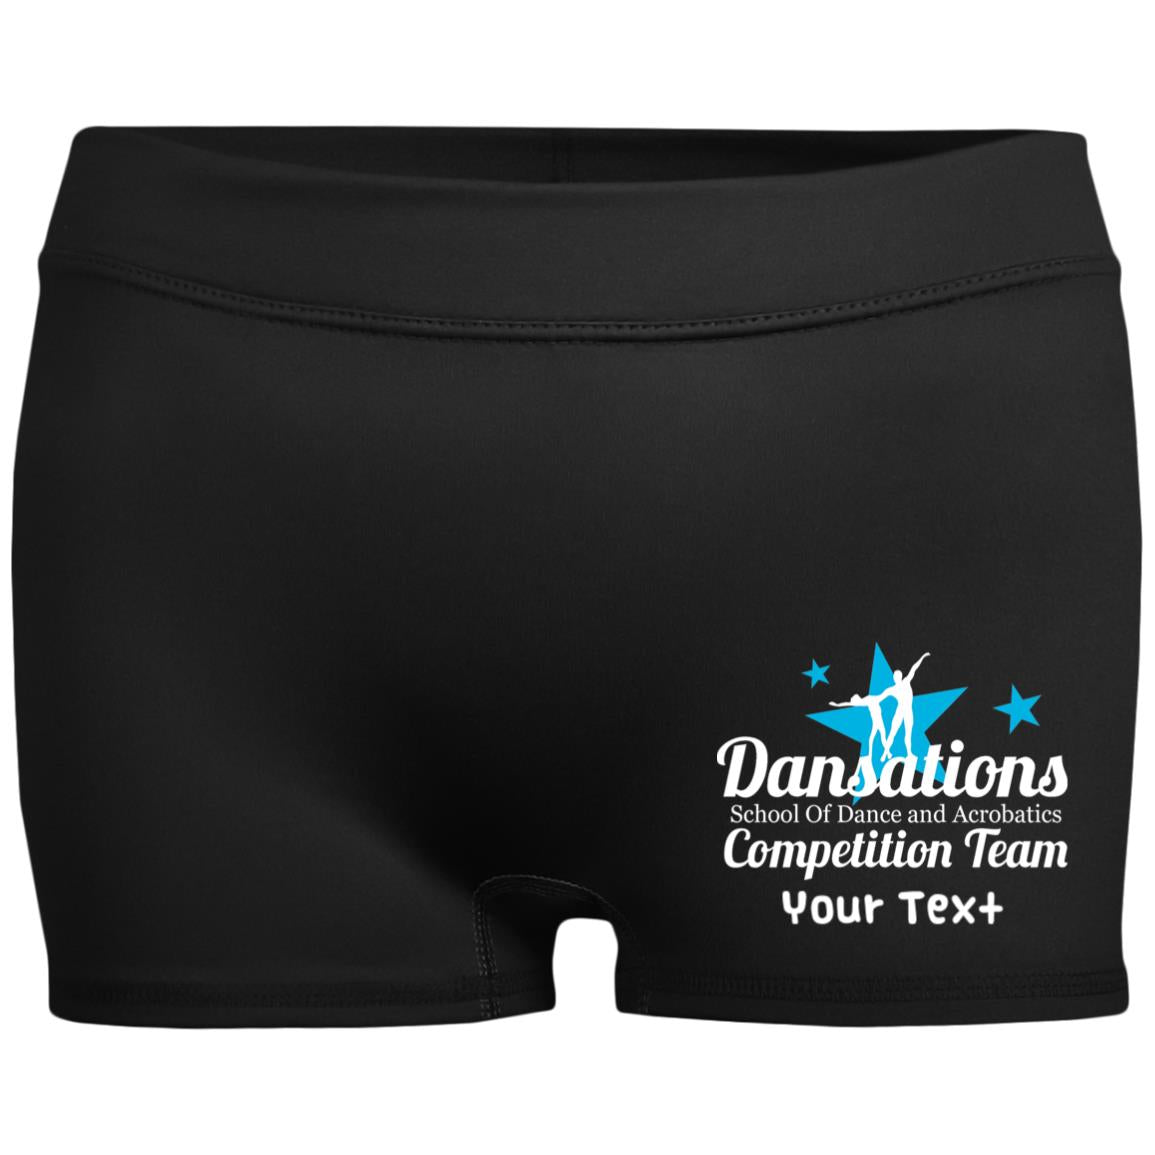 Dansations Competition Team Ladies' Fitted Moisture-Wicking 2.5 inch Inseam Shorts